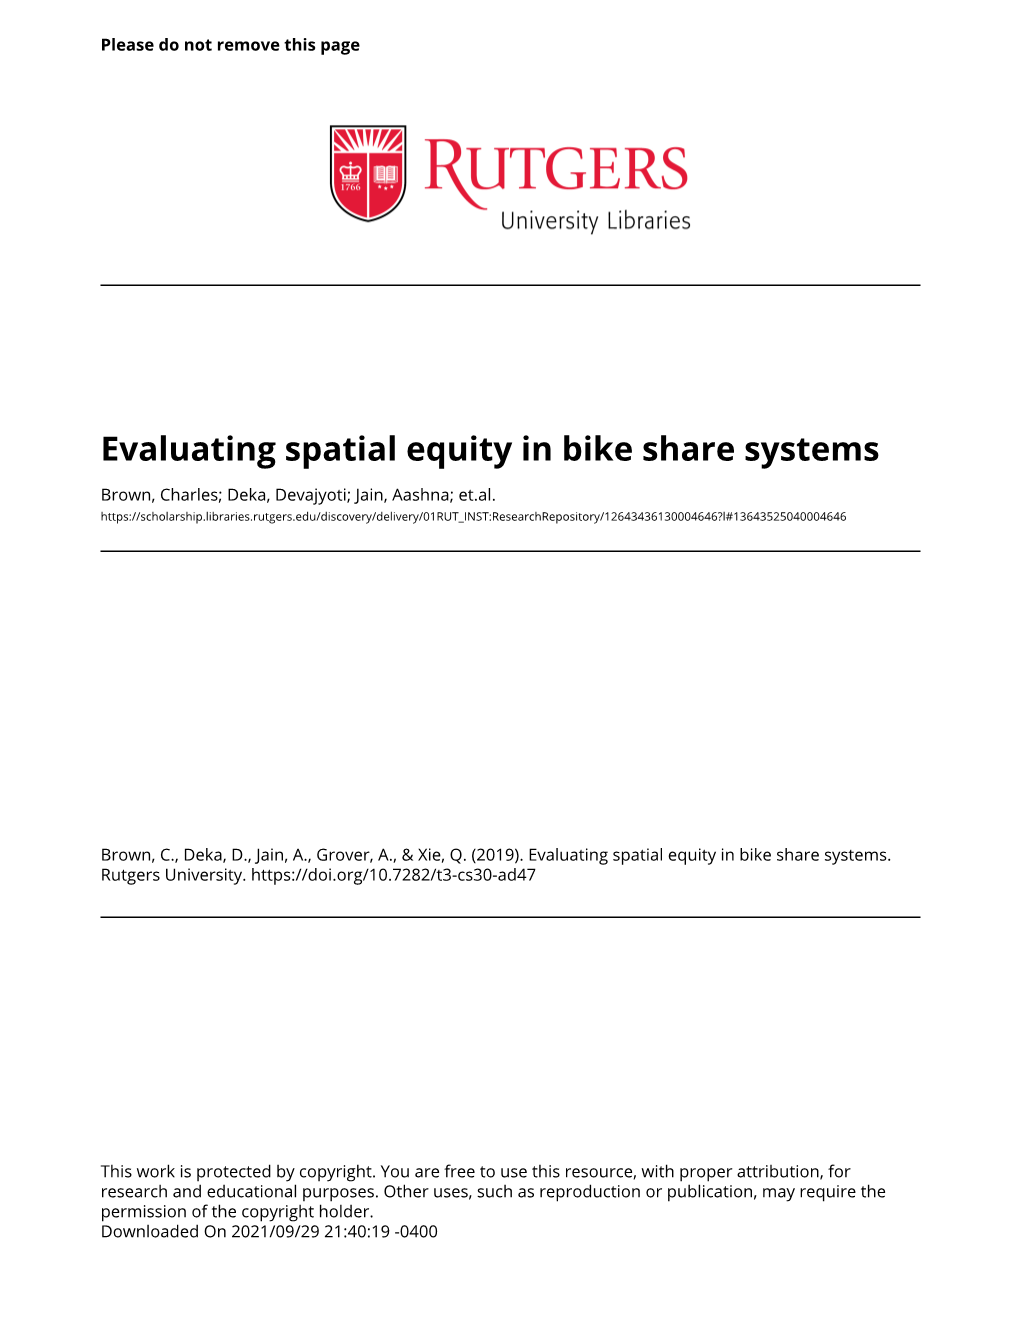 Evaluating Spatial Equity in Bike Share Systems